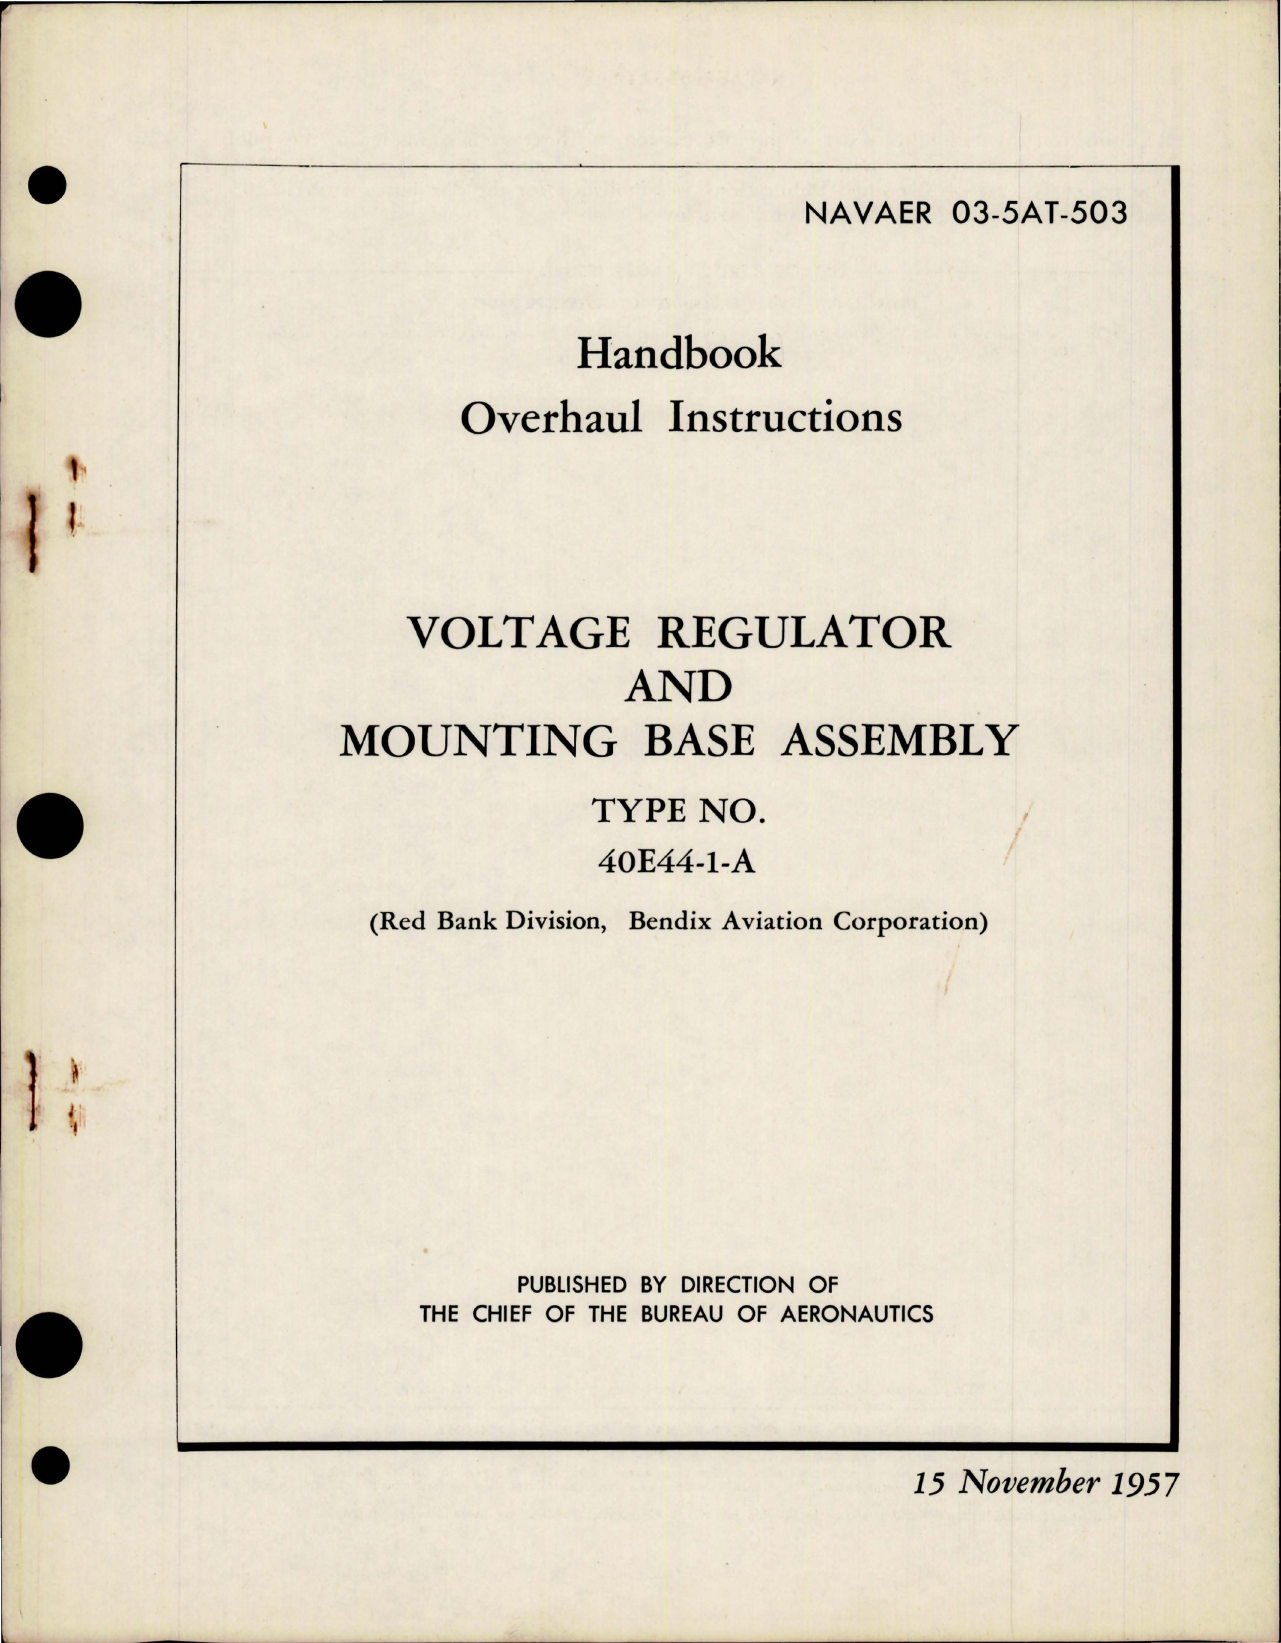 Sample page 1 from AirCorps Library document: Overhaul Instructions for Voltage Regulator and Mounting Base Assembly - Type 40E44-1-A